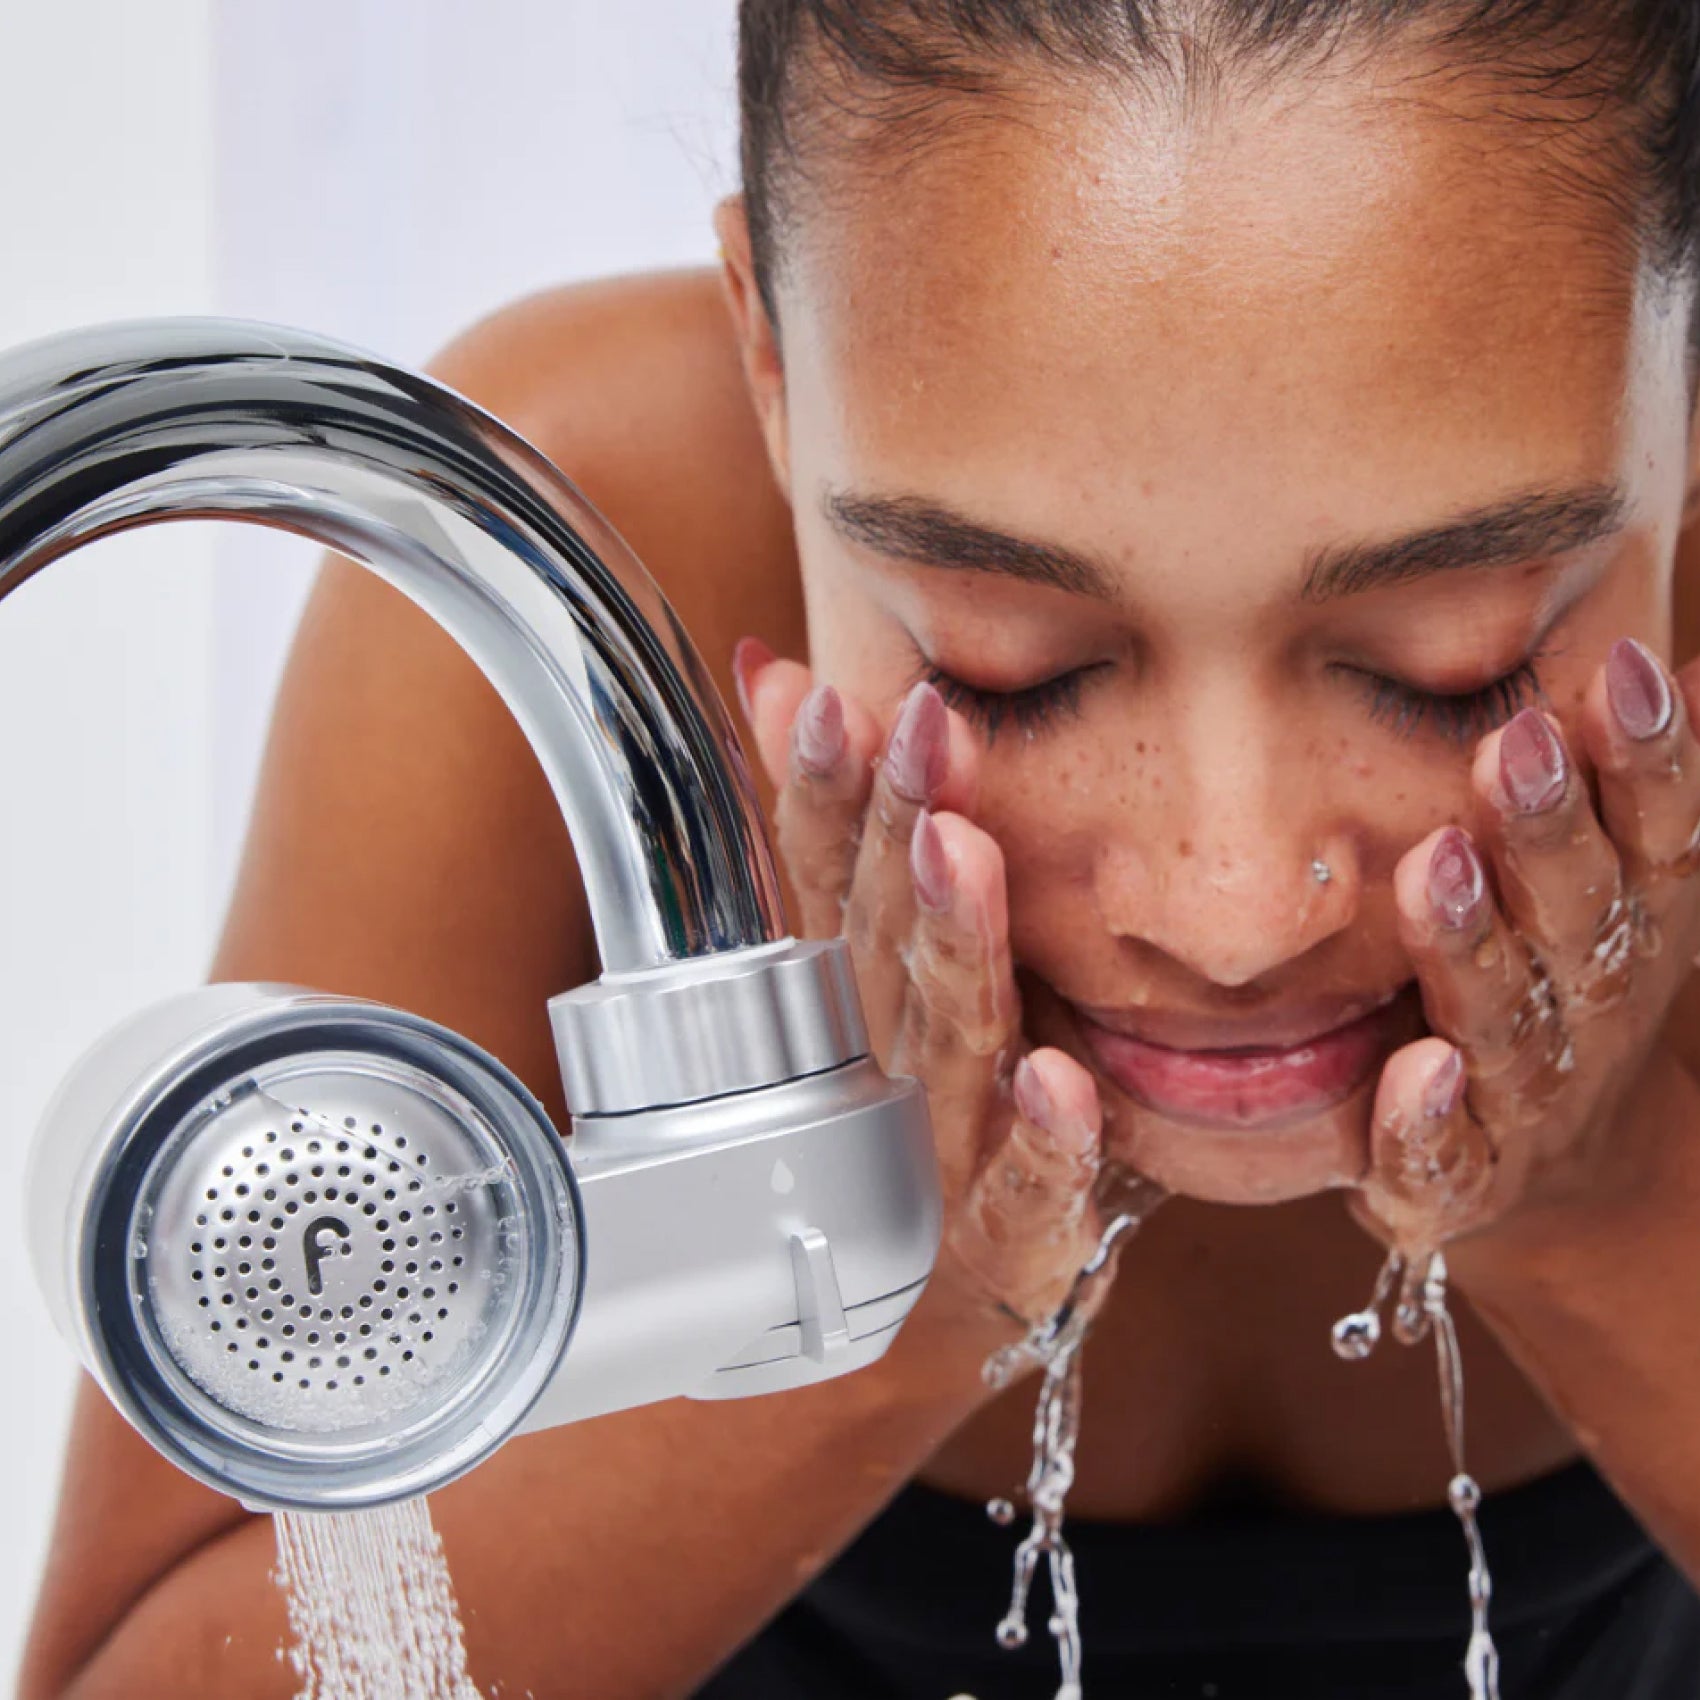 Woman rinsing face with water from a showerhead.